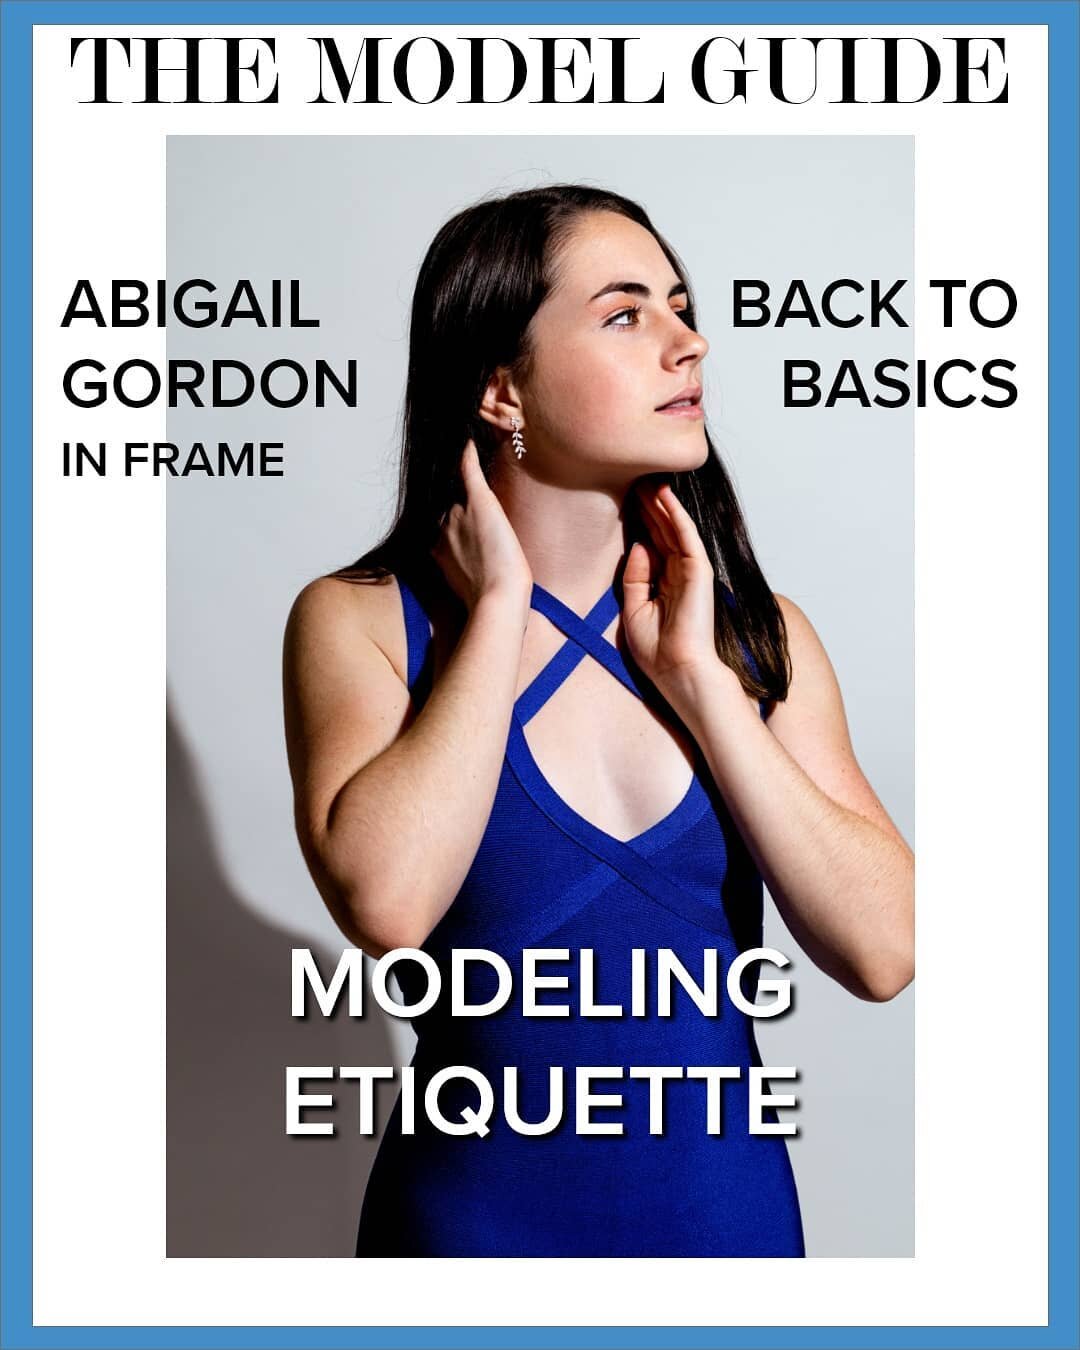 MODELING TIPS 101 - COMMON COURTESY

What are some of your pet peeves when working as a photographer, model, or client? Drop you answer in the comments below! 

I've worked with a wide range of models and clients, and have had an even wider range of 